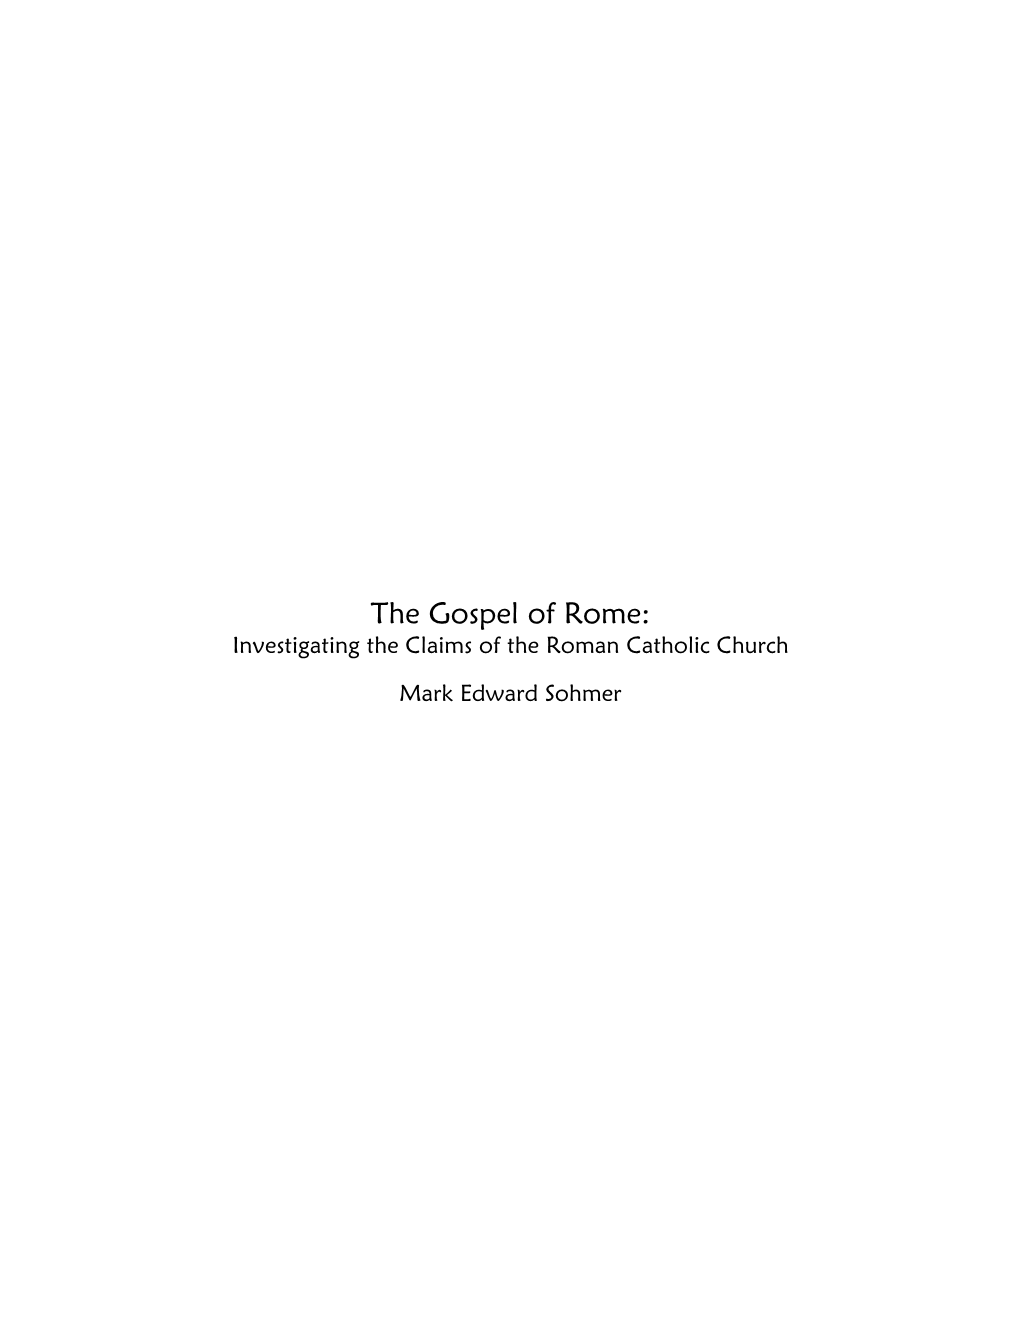 The Gospel of Rome: Investigating the Claims of the Roman Catholic Church